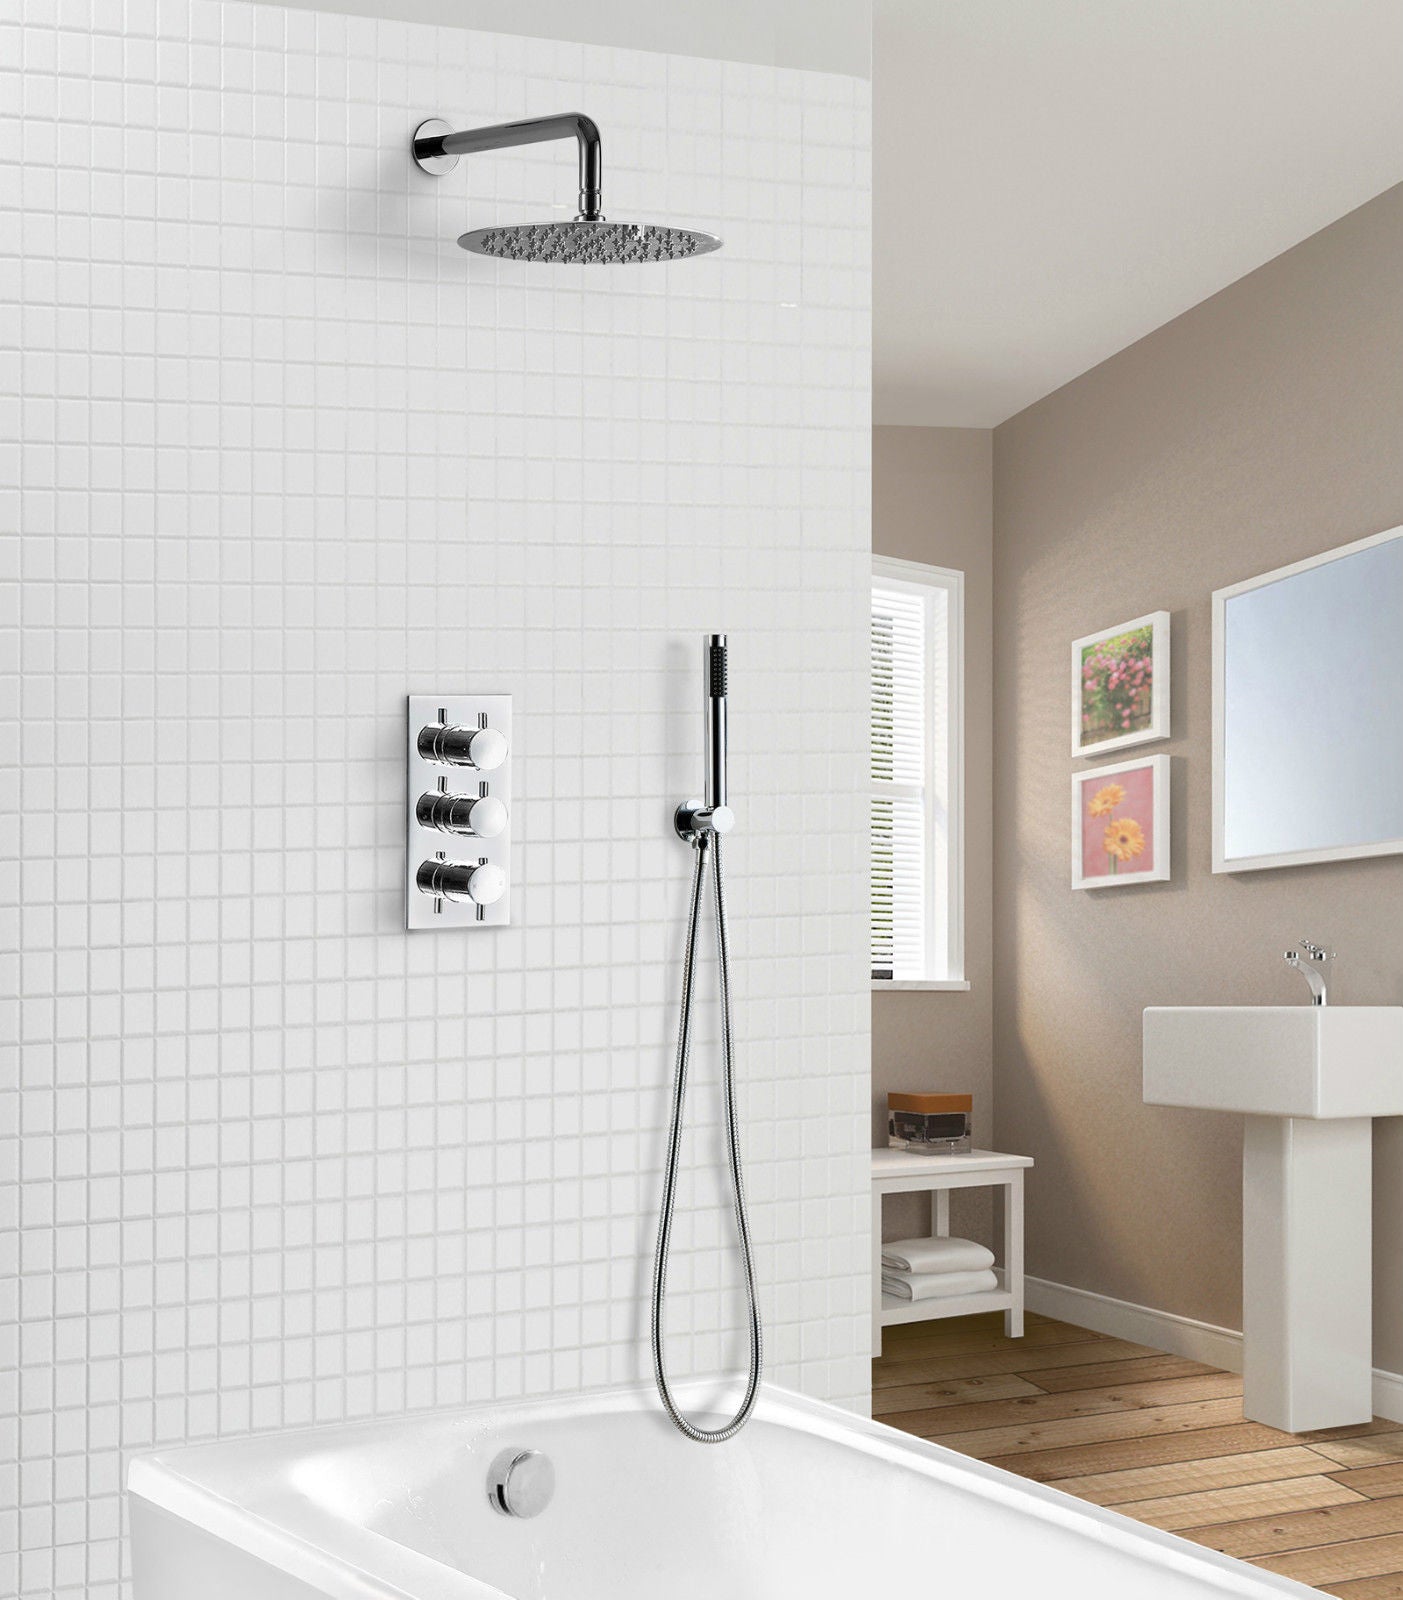 Calla Concealed Slim Overhead Shower Head 3 Dial Thermostatic Valve And Pencil Handset